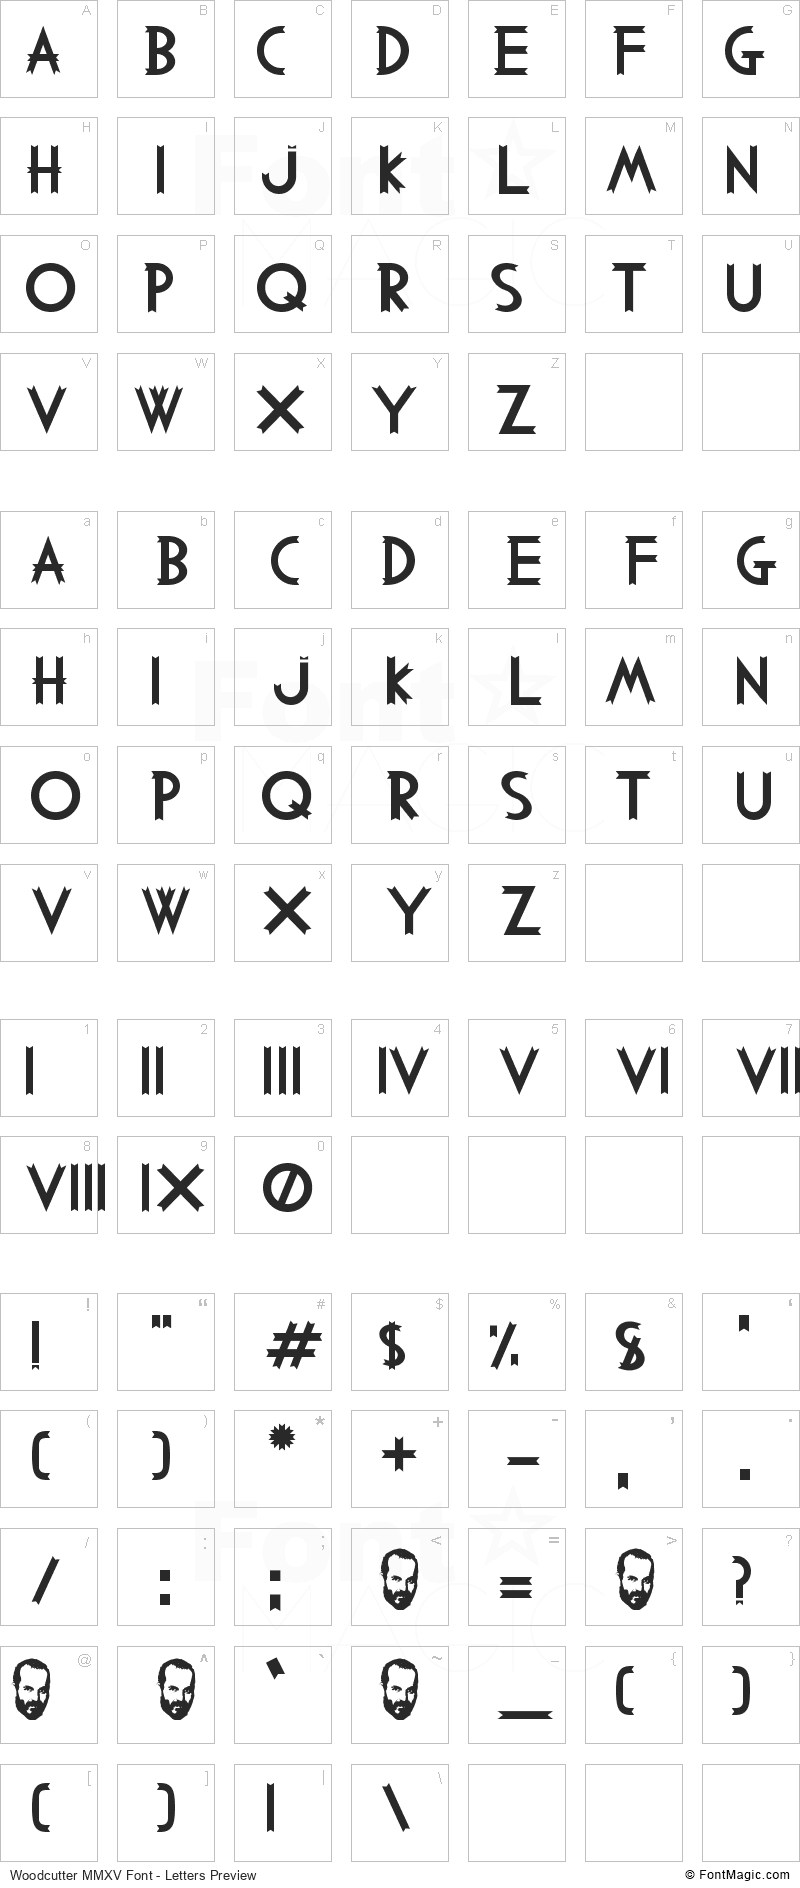 Woodcutter MMXV Font - All Latters Preview Chart